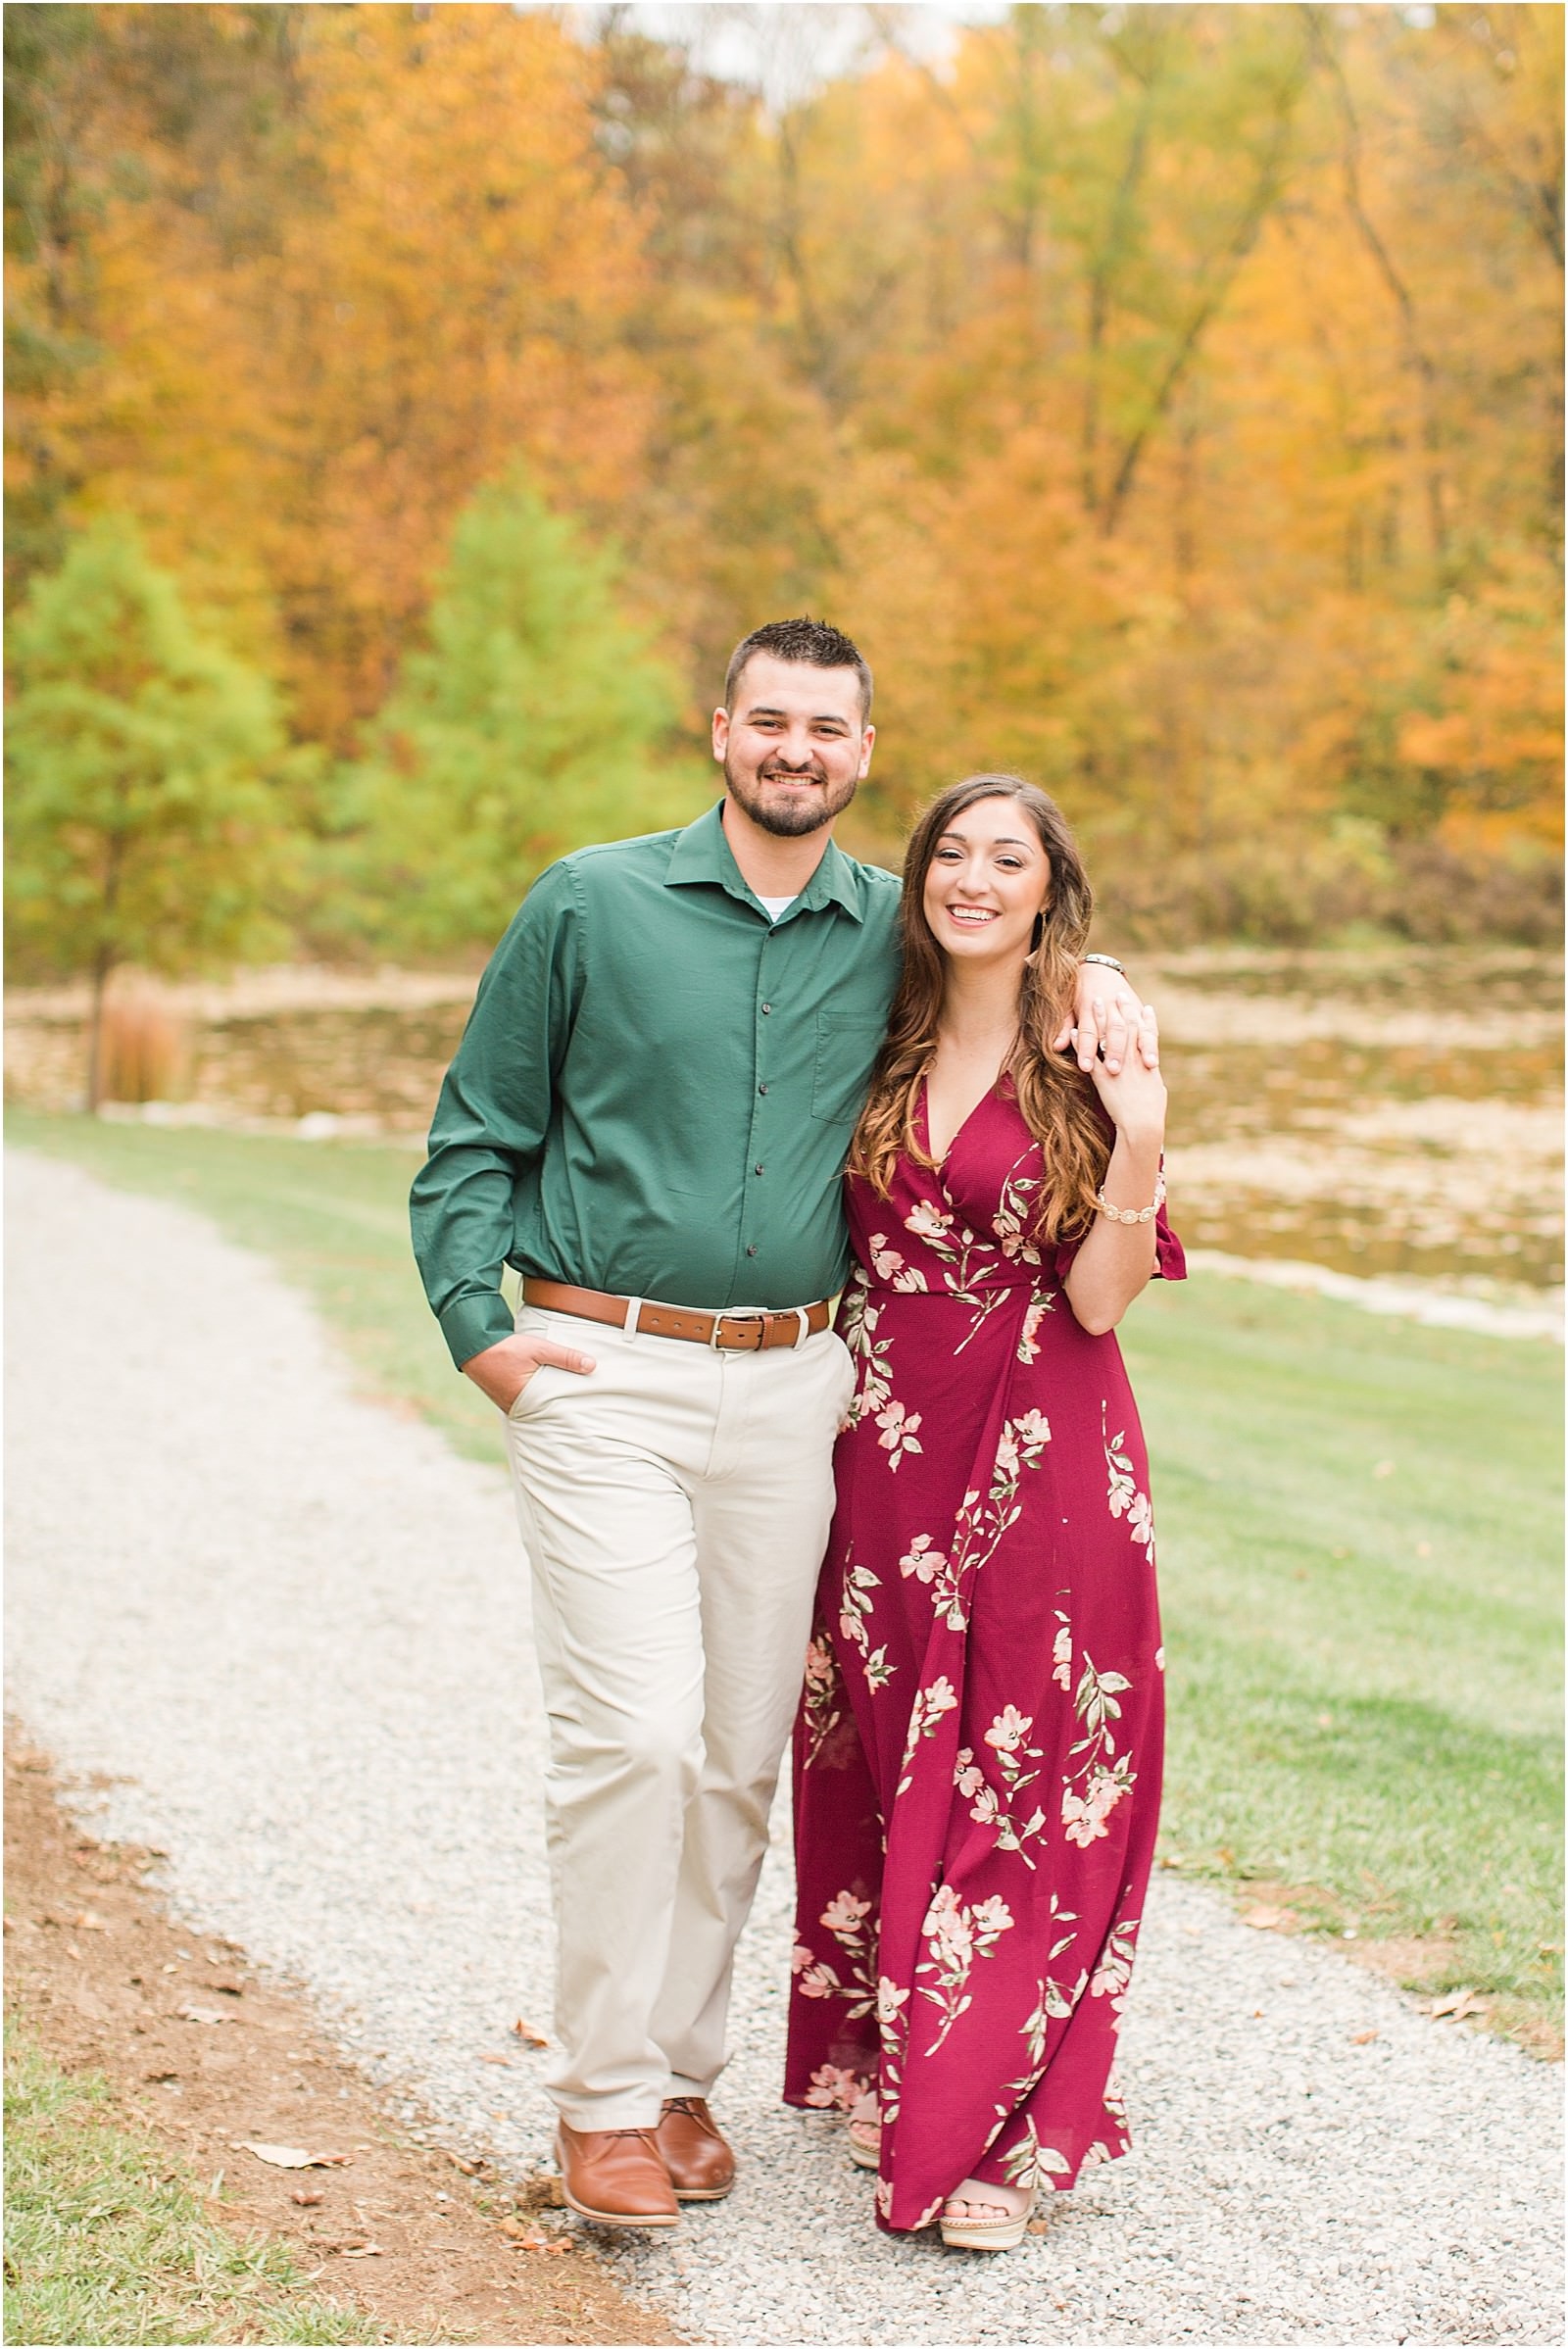 A Fall Oliver Winery Engagement Session | Sally and Andrew | Bret and Brandie Photography 0009.jpg